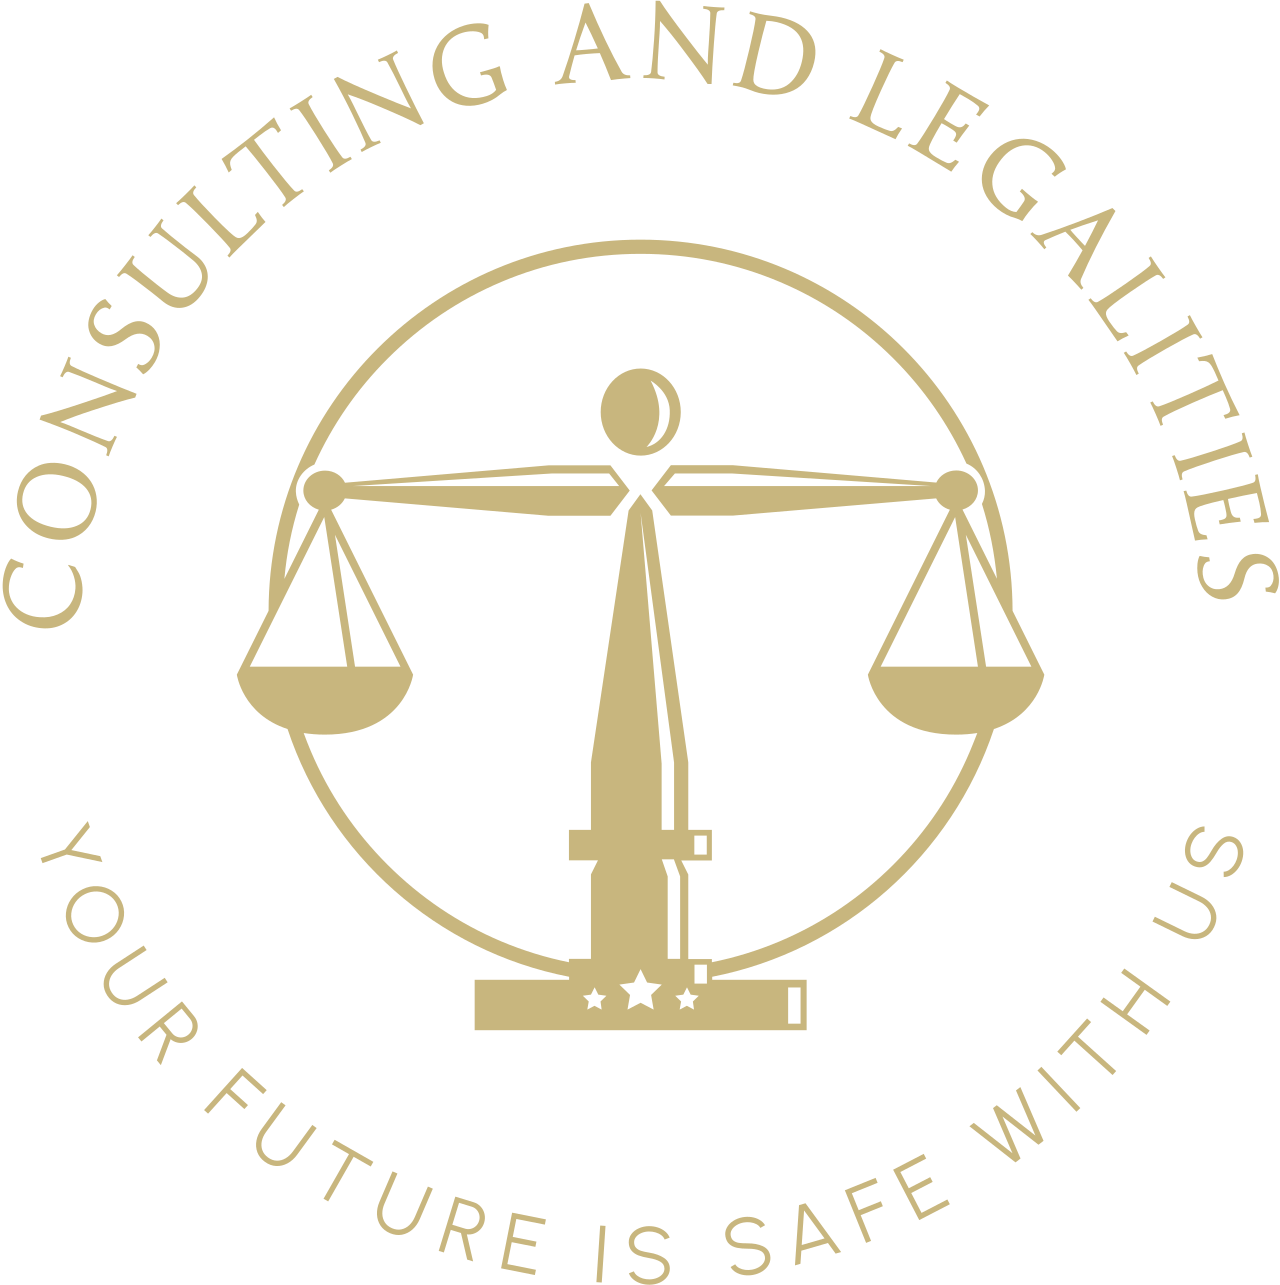 CONSULTING AND LEGALITIES 's logo